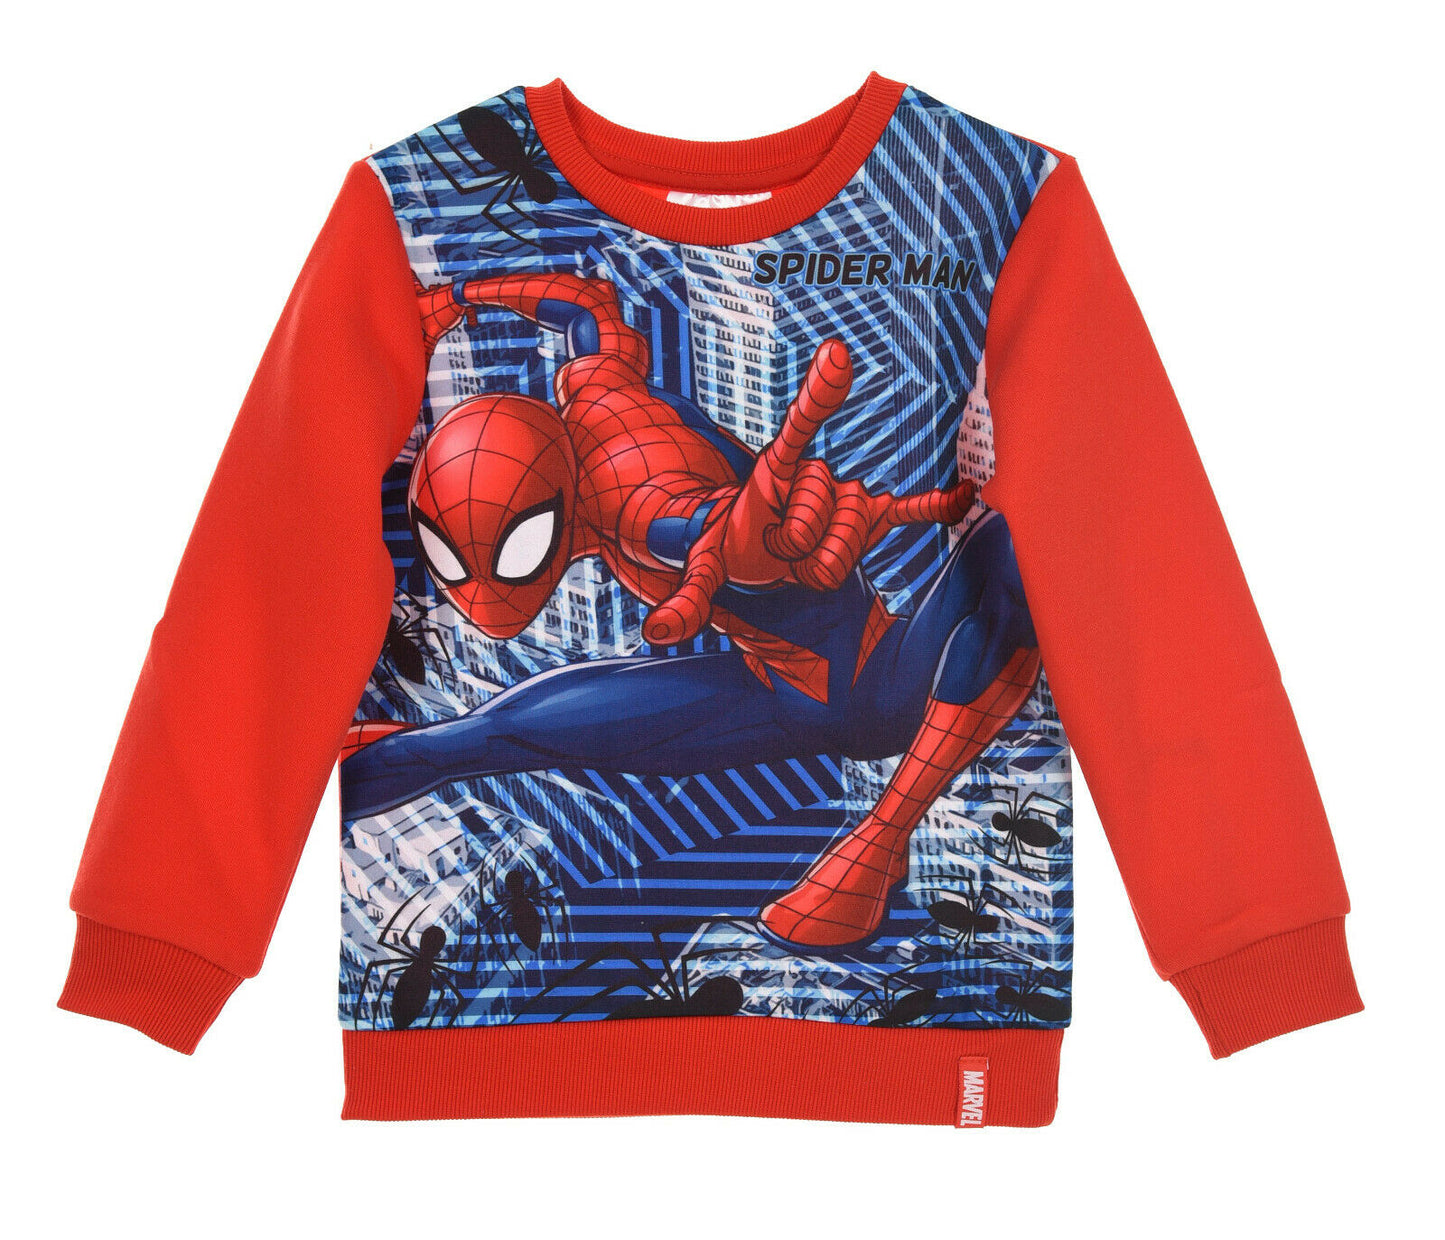 Spiderman Sweat shirt, Perfect For Any Spiderman Lover Red Design, Ages 3 & 8  65% Polyester & 35% Cotton Official Merchandise